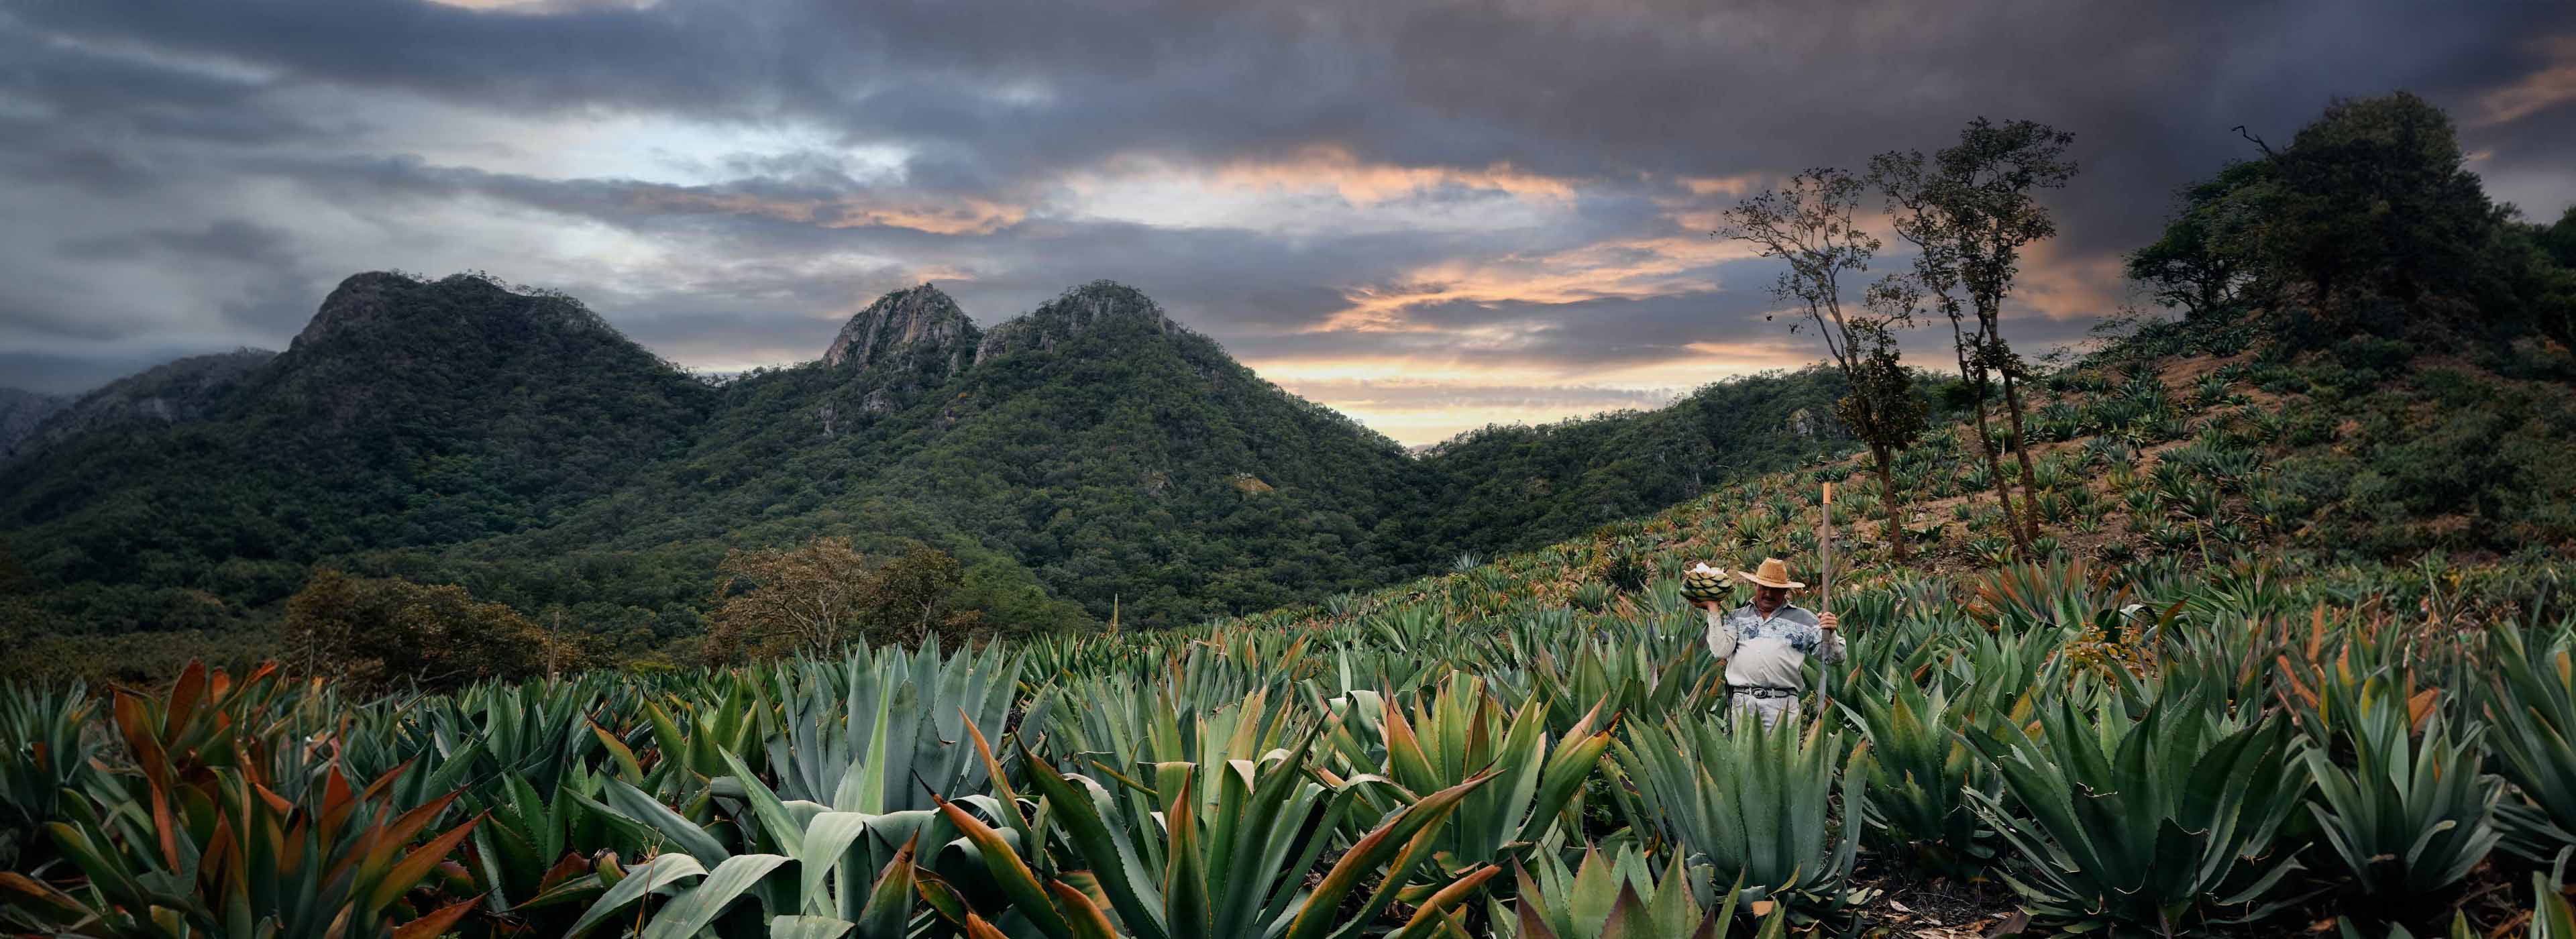 Agave Field Mexico